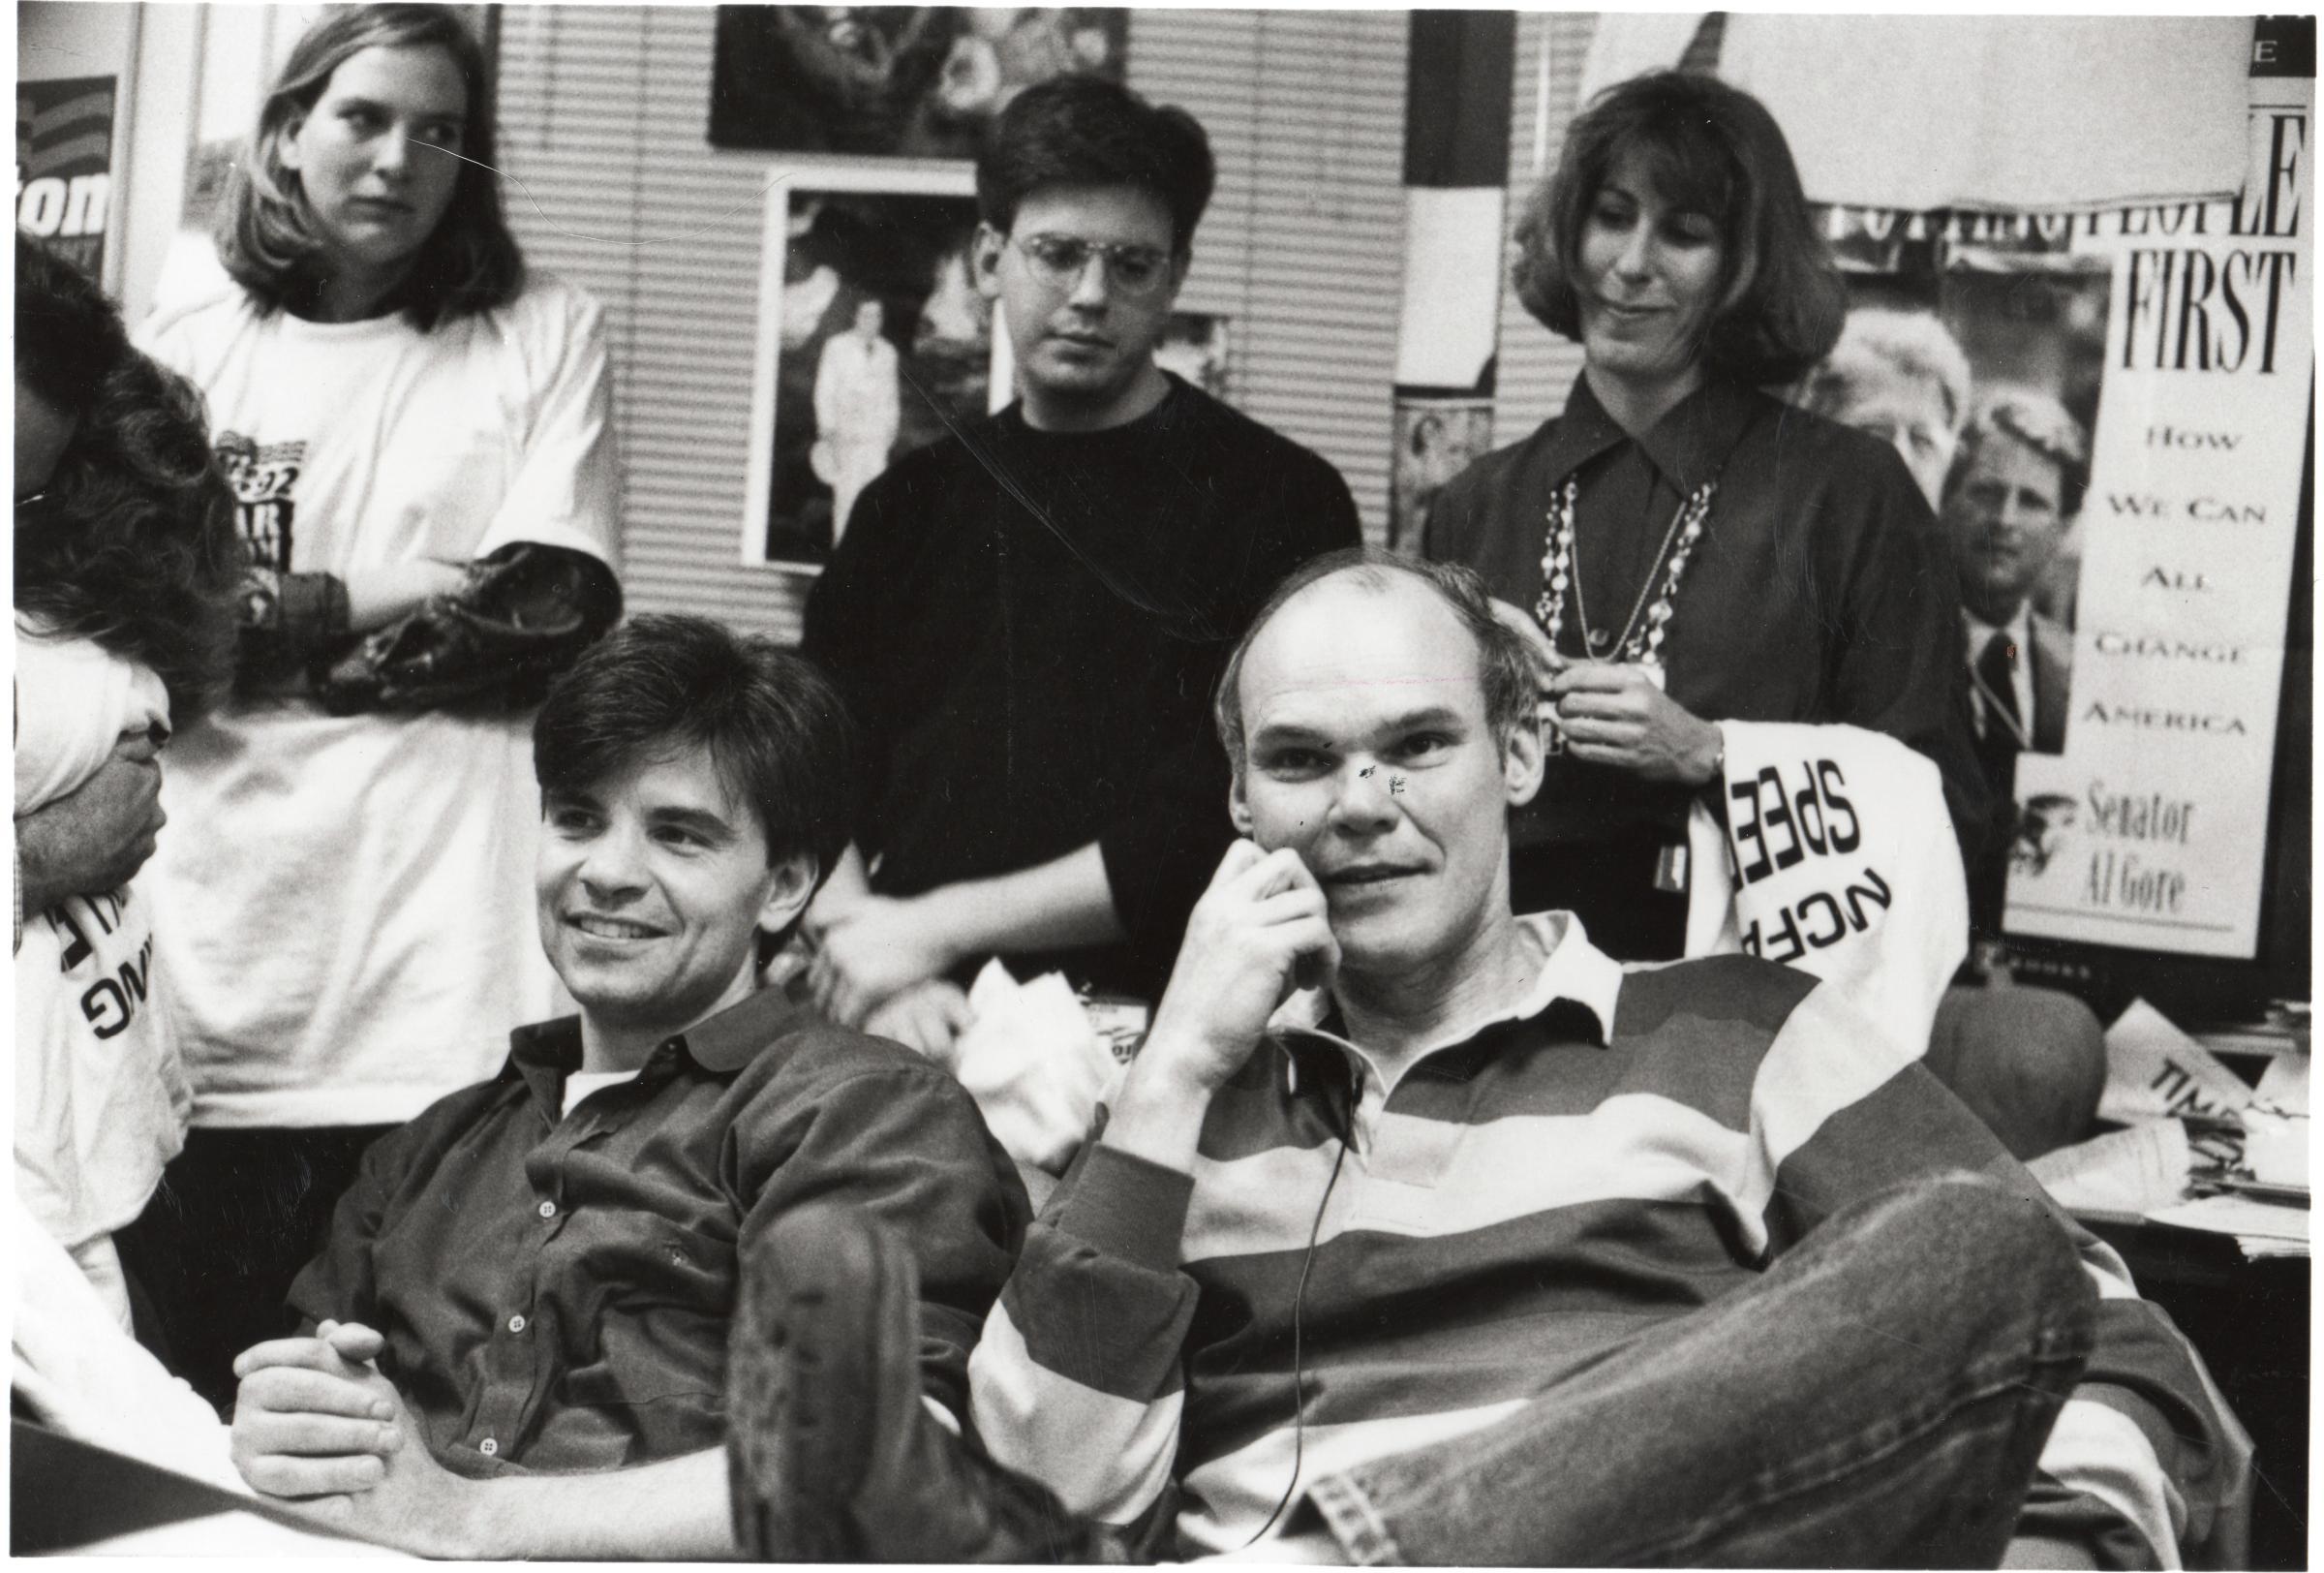 George Stephanopoulos (left) and James Carville (right) in a still from The War Room, 1993.